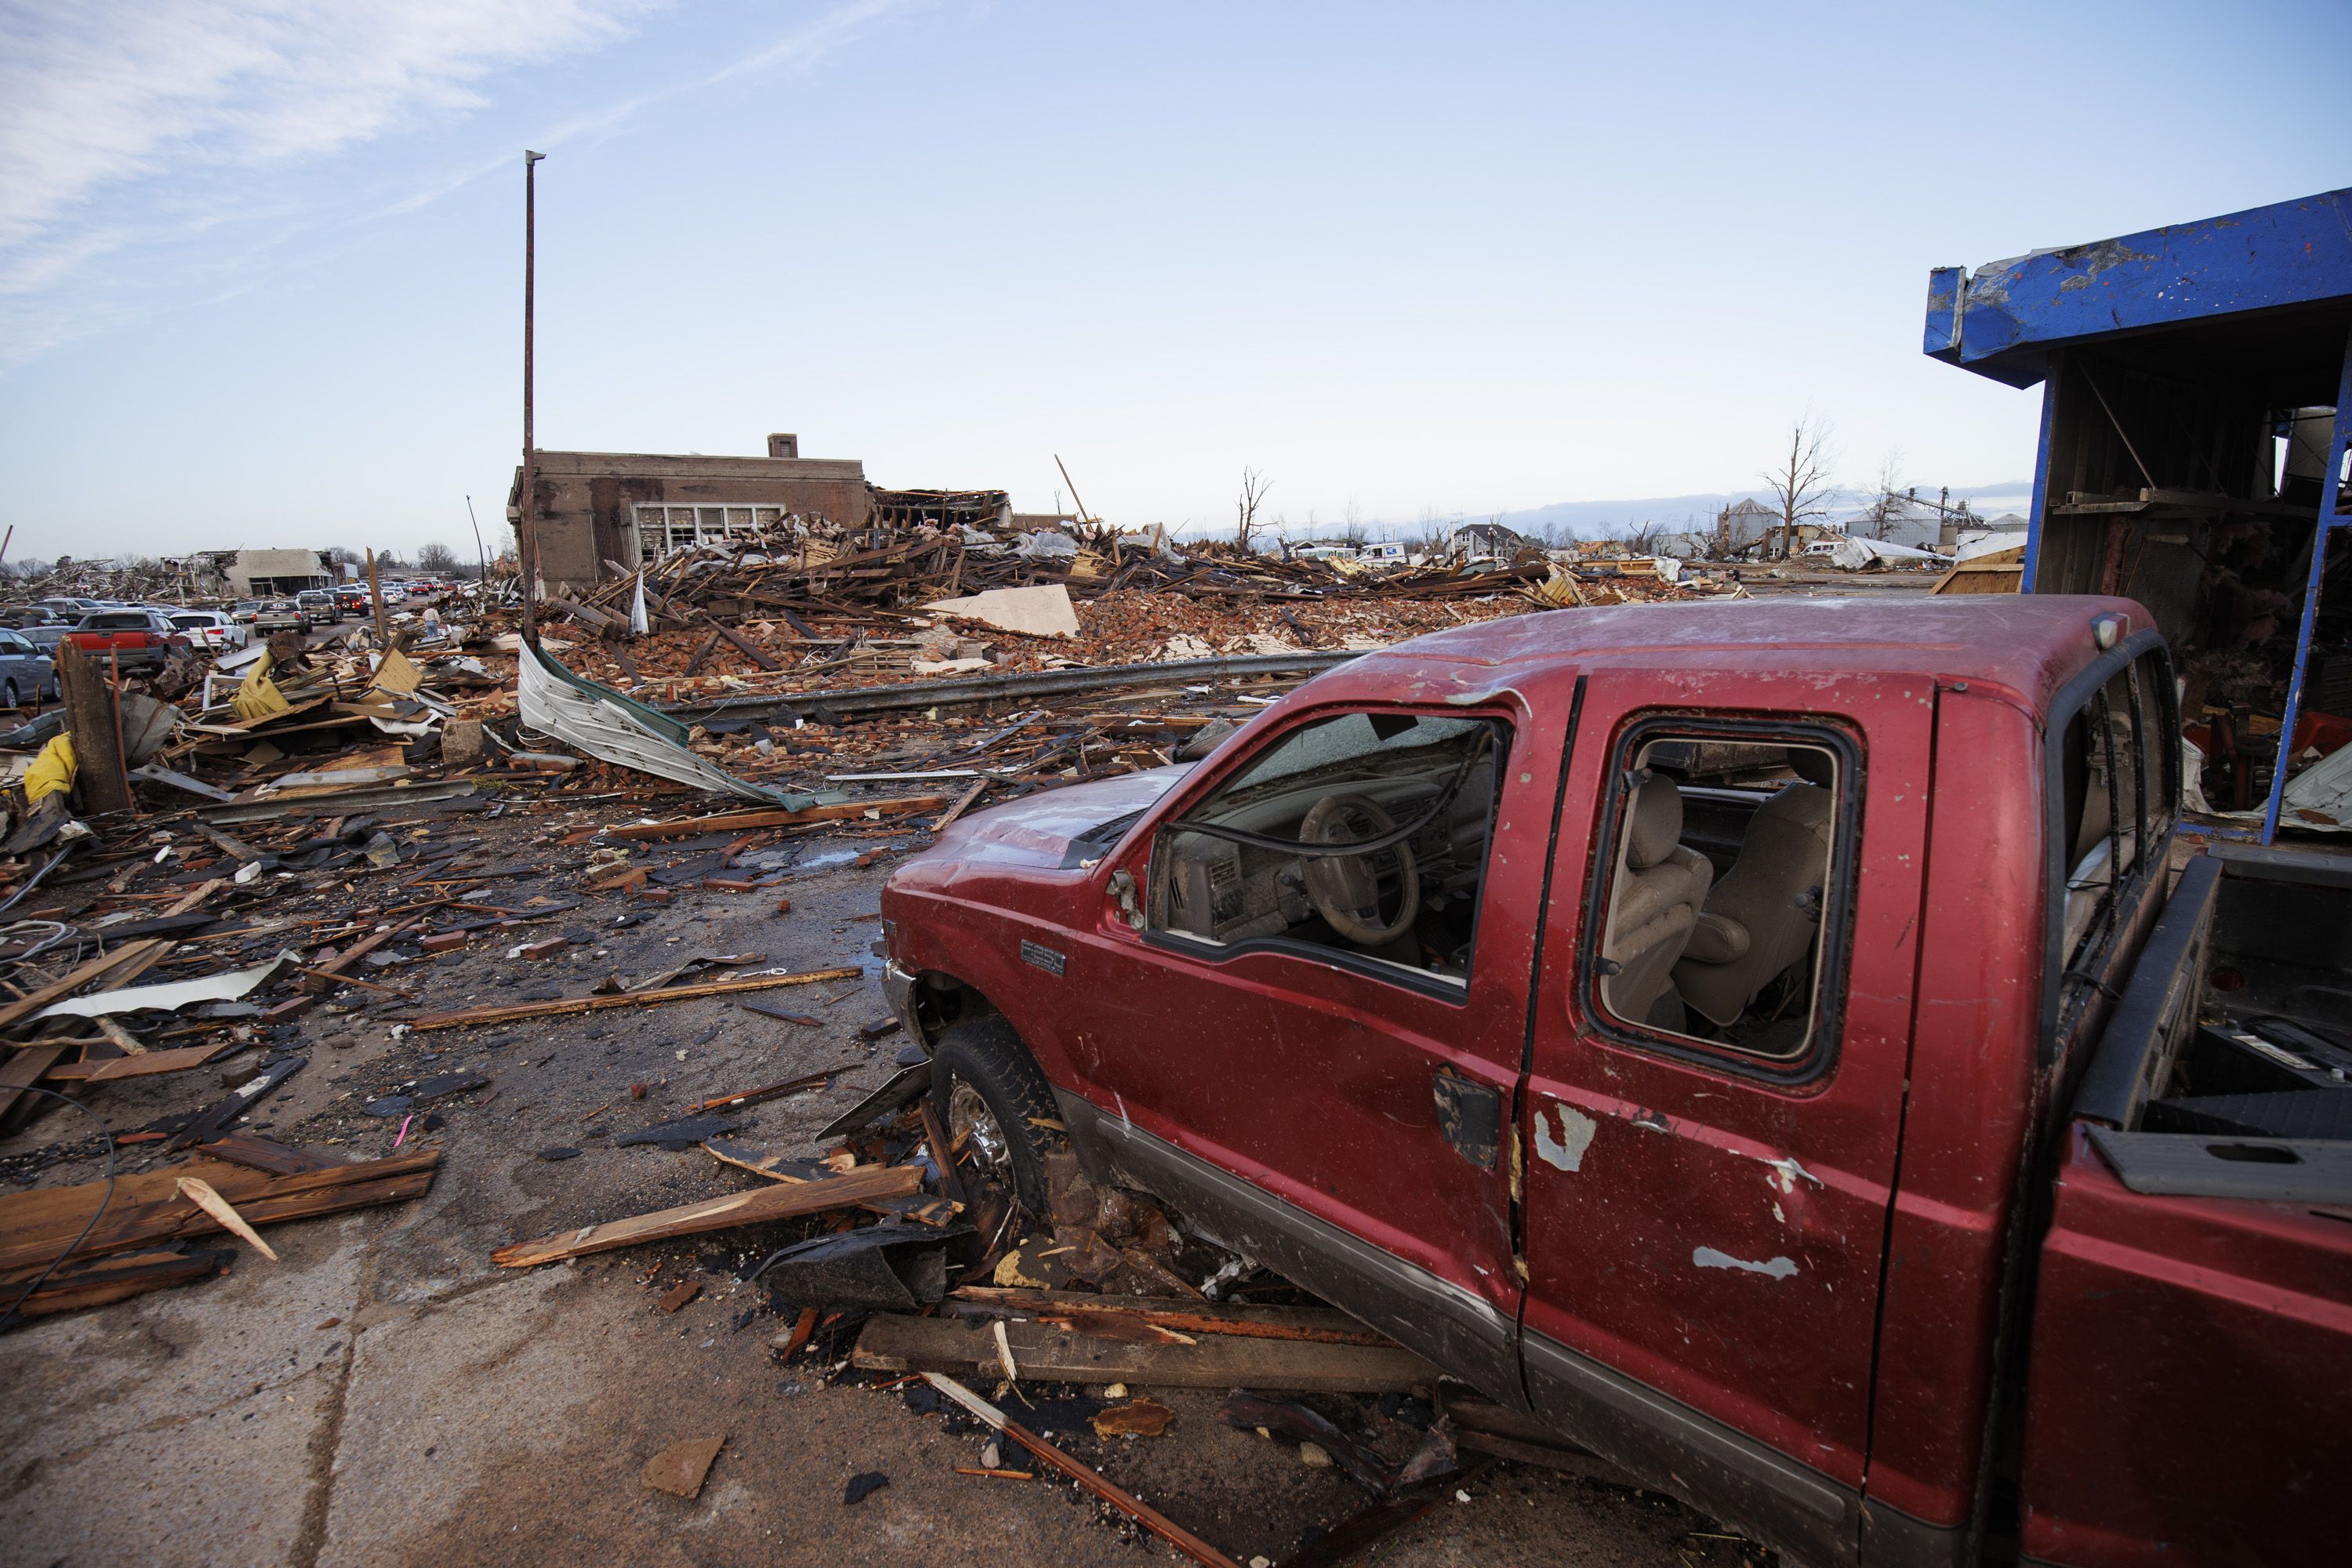 Heavy damage is seen downtown after a tornado swept through the area on December 11, 2021 in Mayfield, Kentucky.